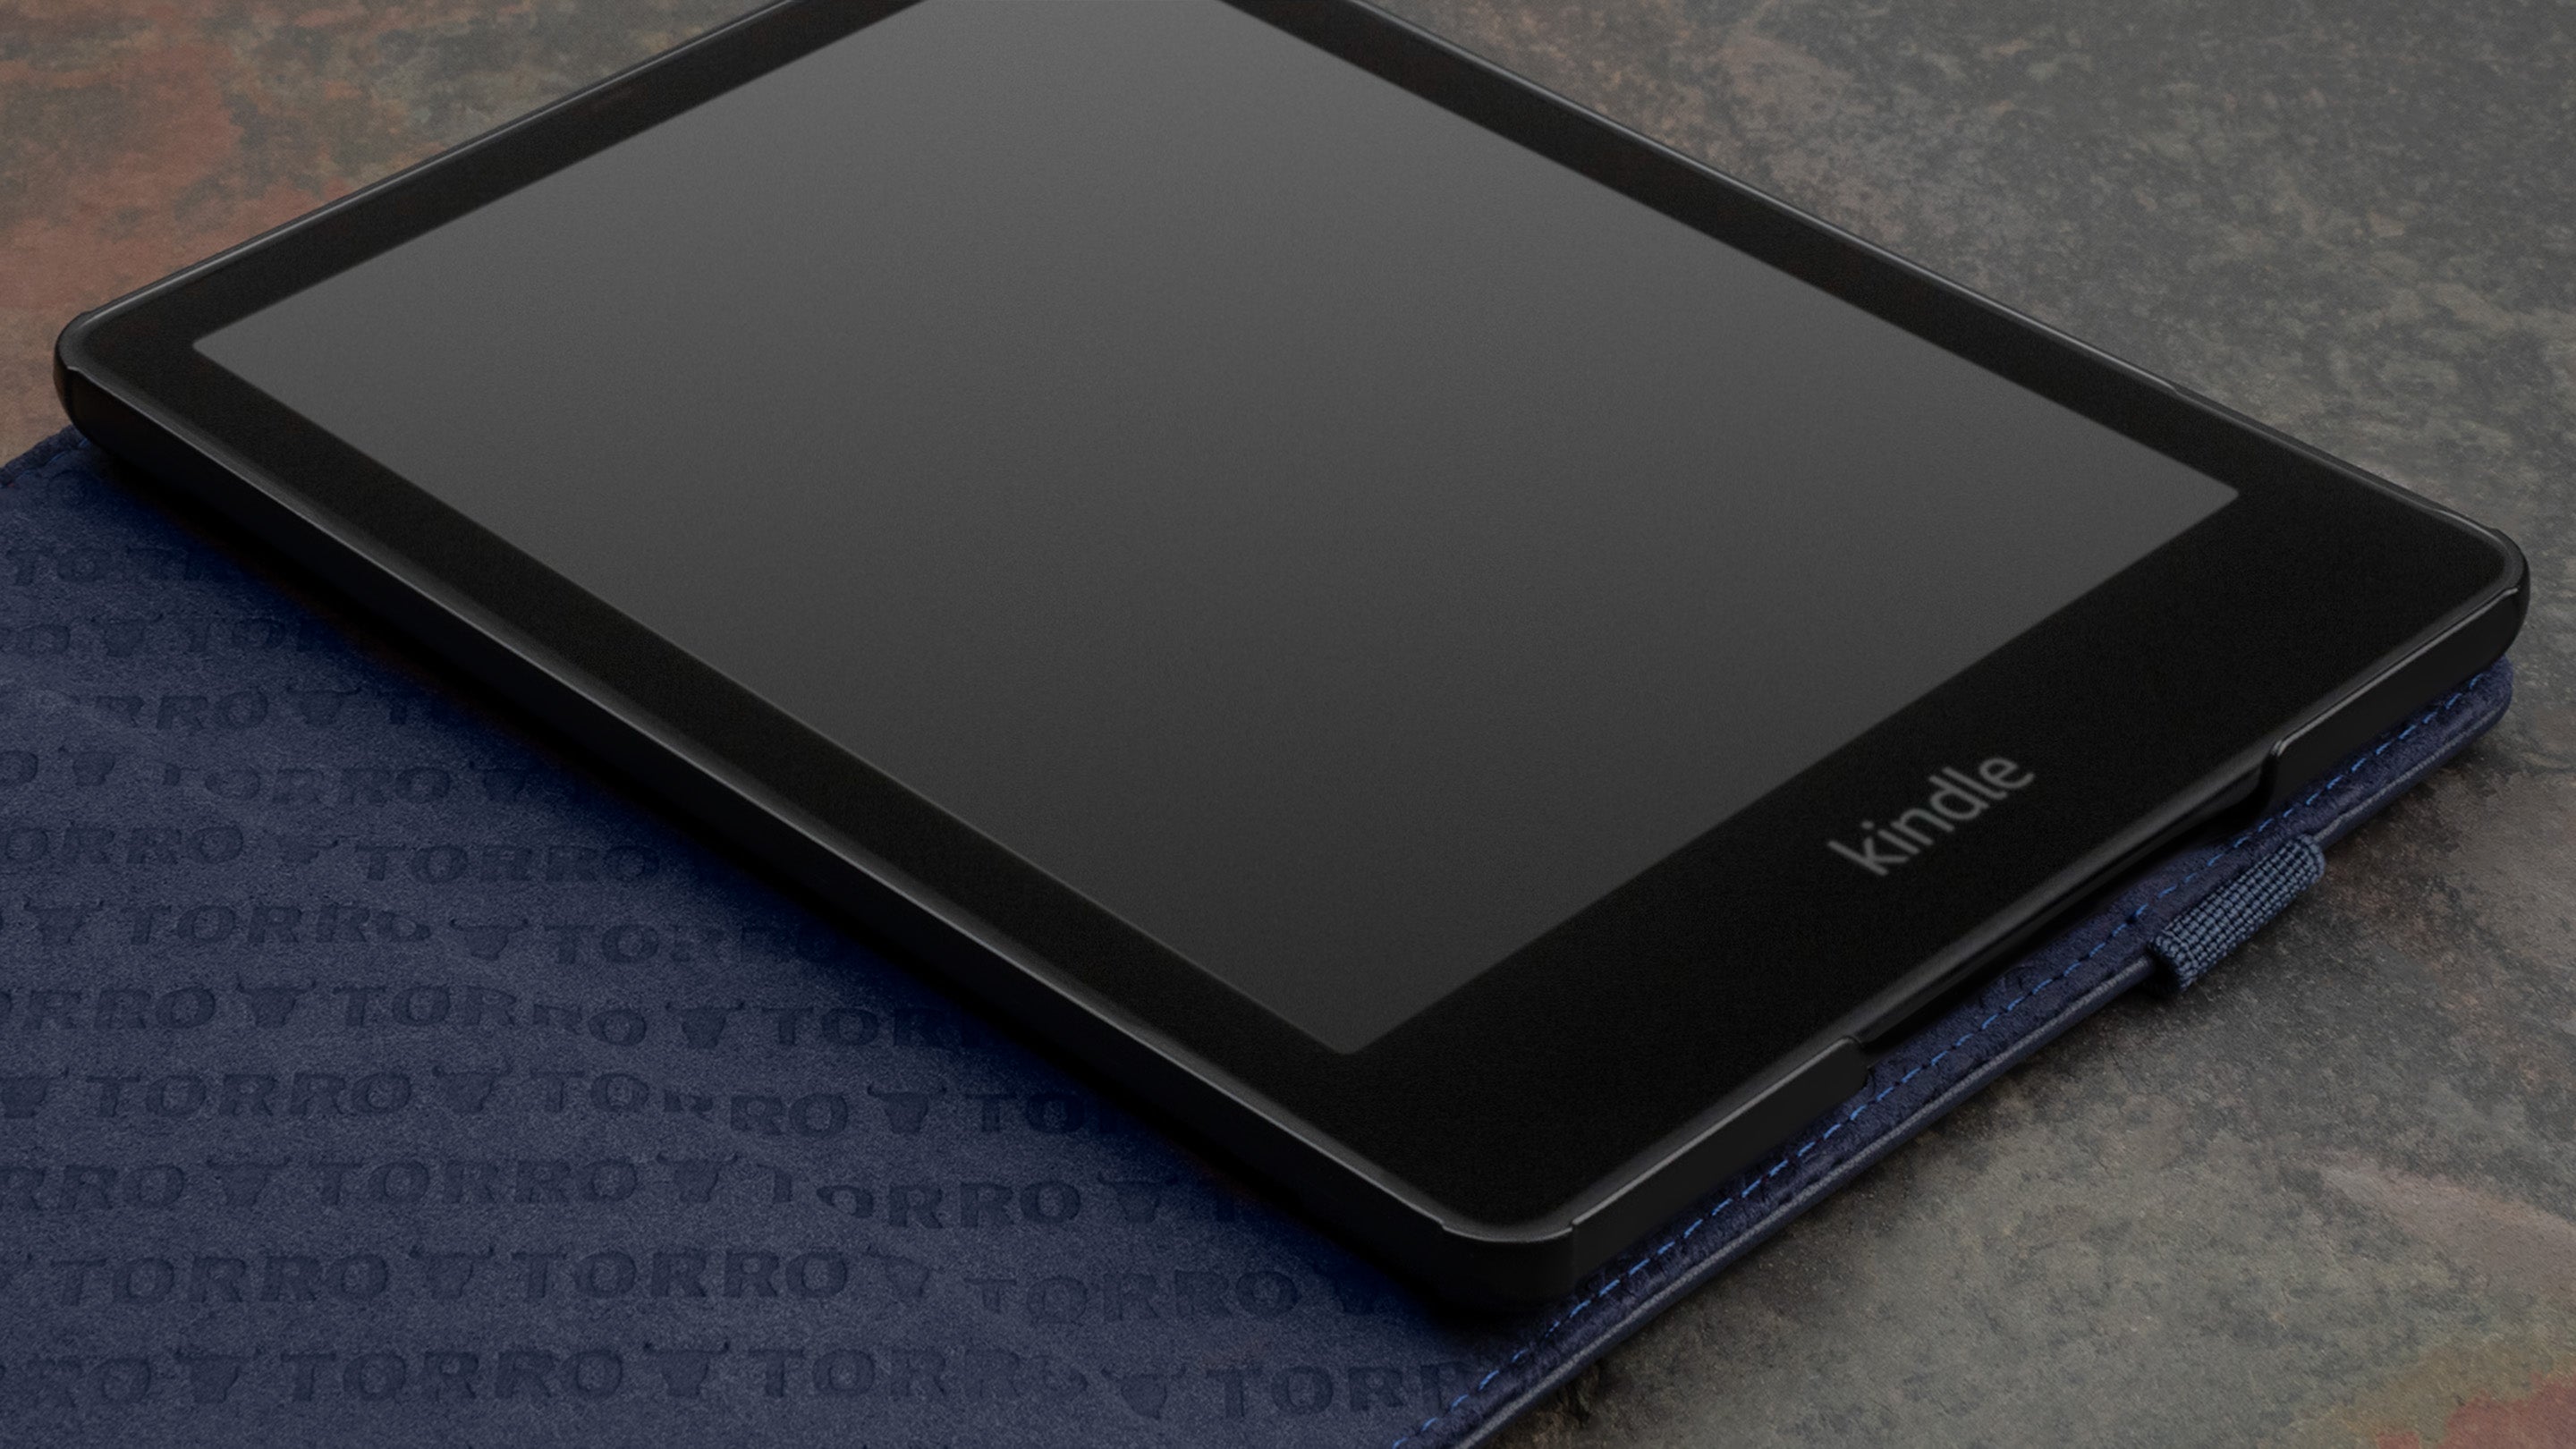 The best Kindle 2024: which  ereader should you buy?